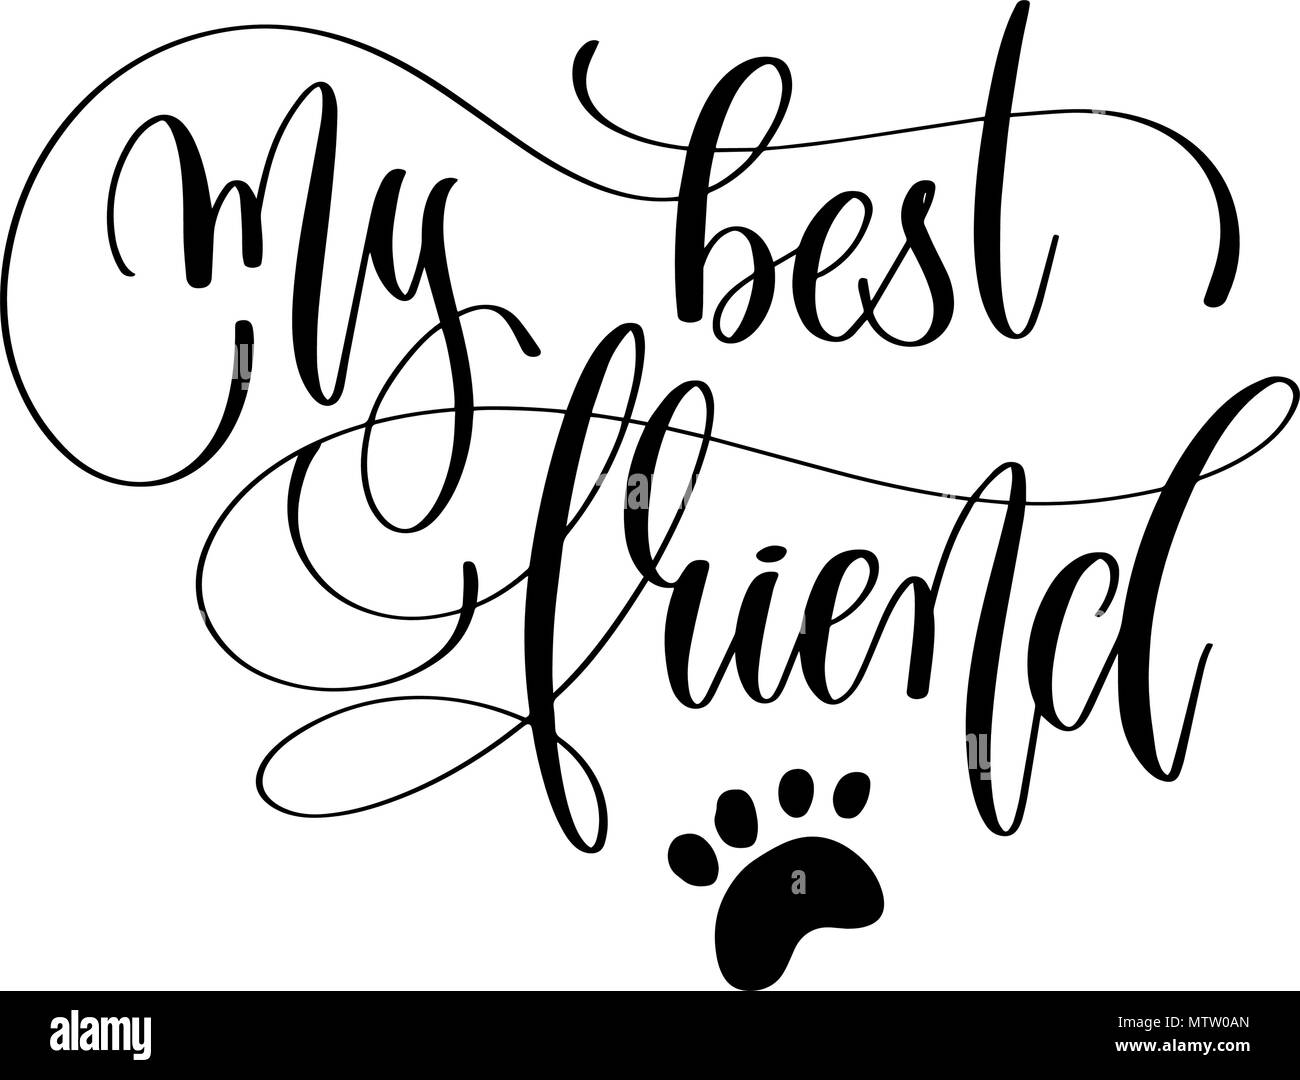 Download my best friend - hand lettering text positive quote Stock ...